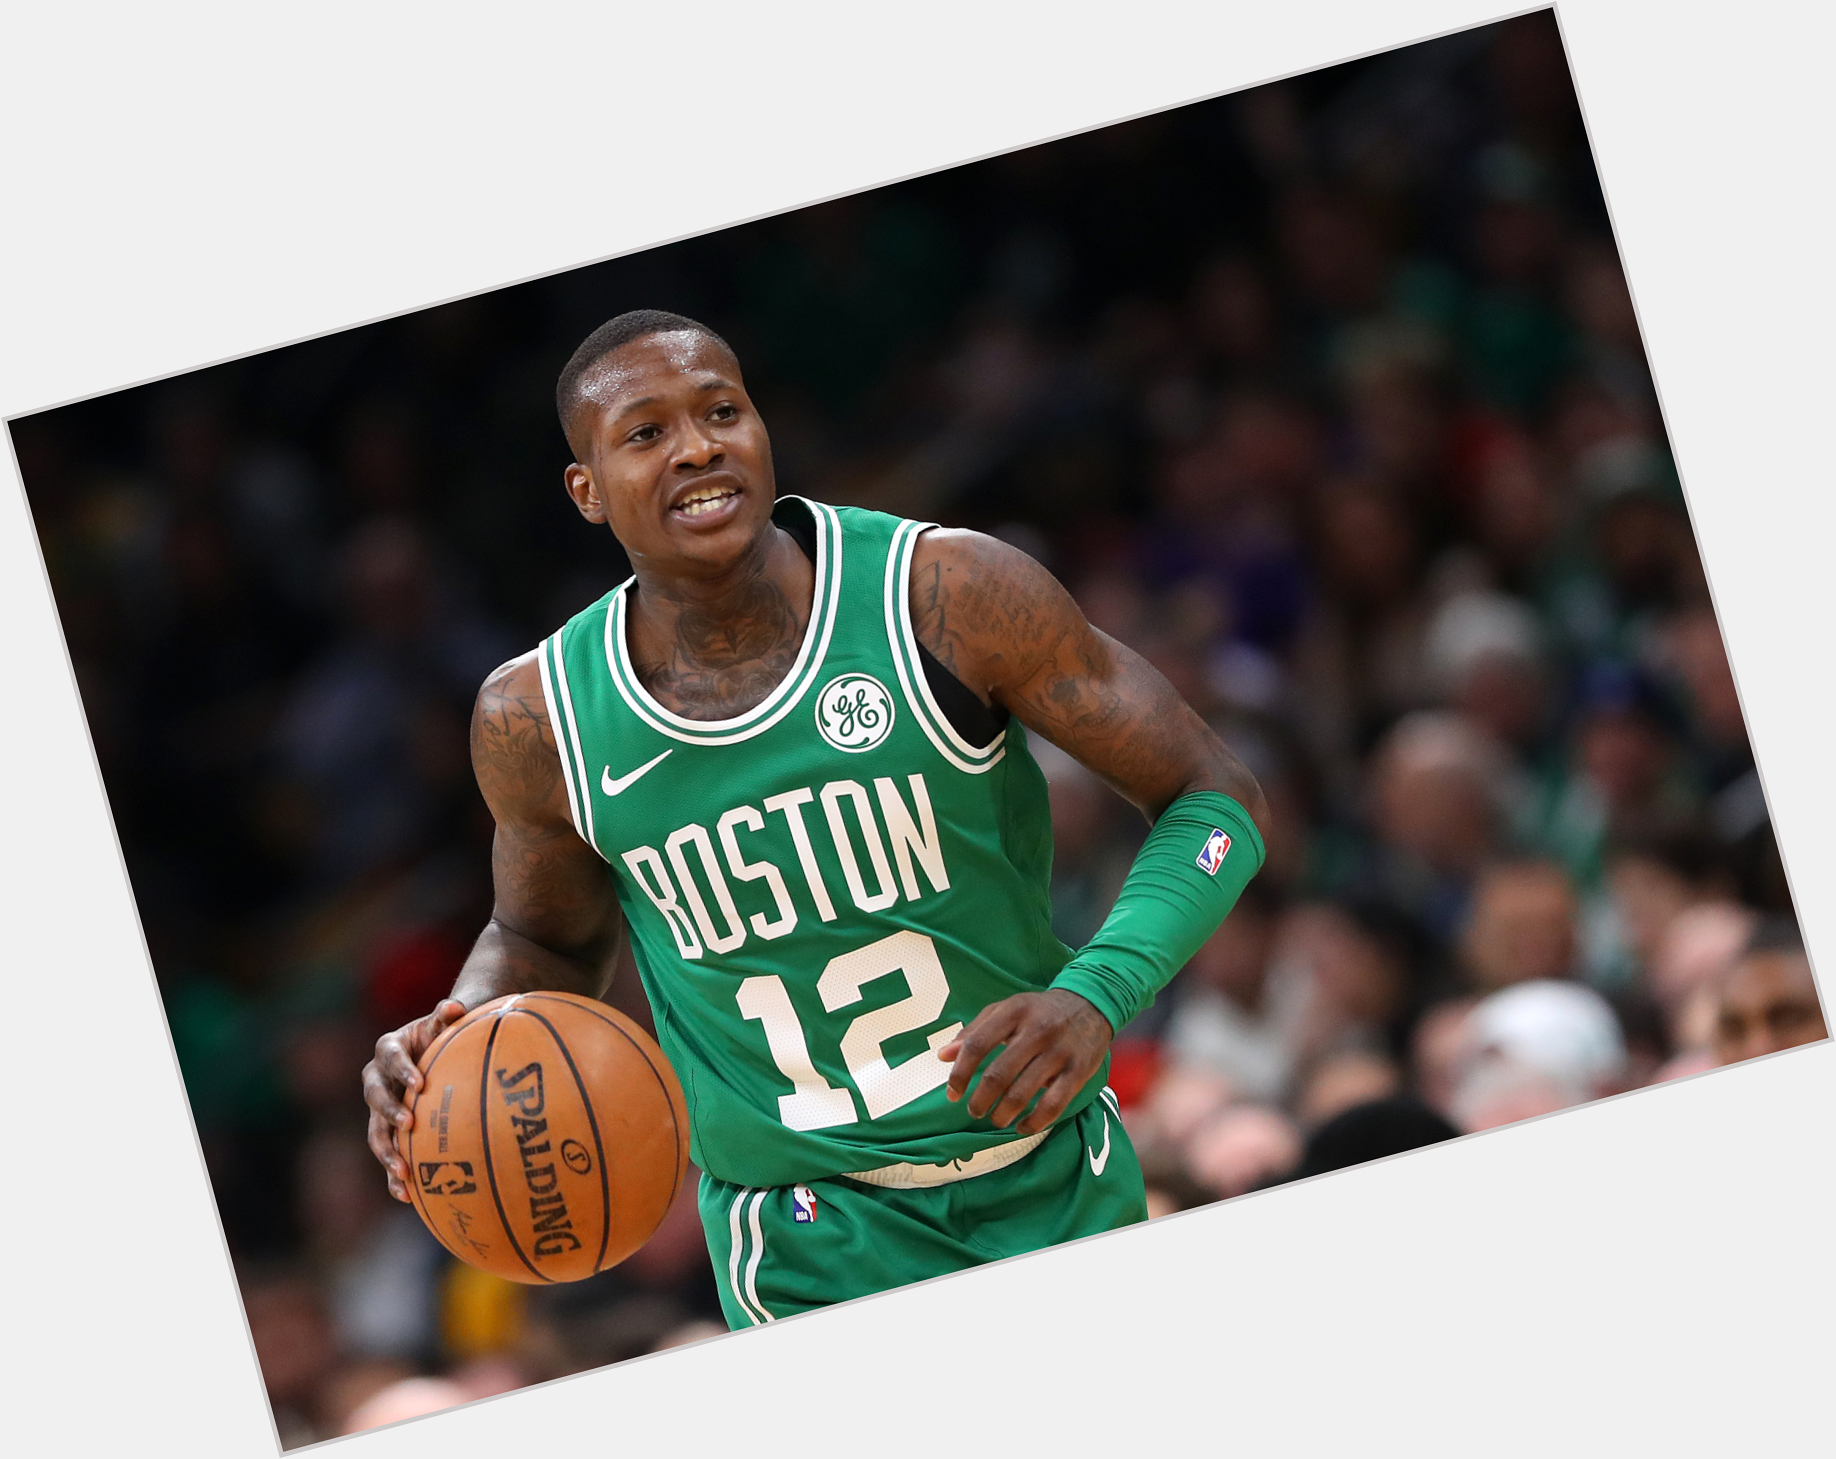 Http://fanpagepress.net/m/T/Terry Rozier Sexy 0